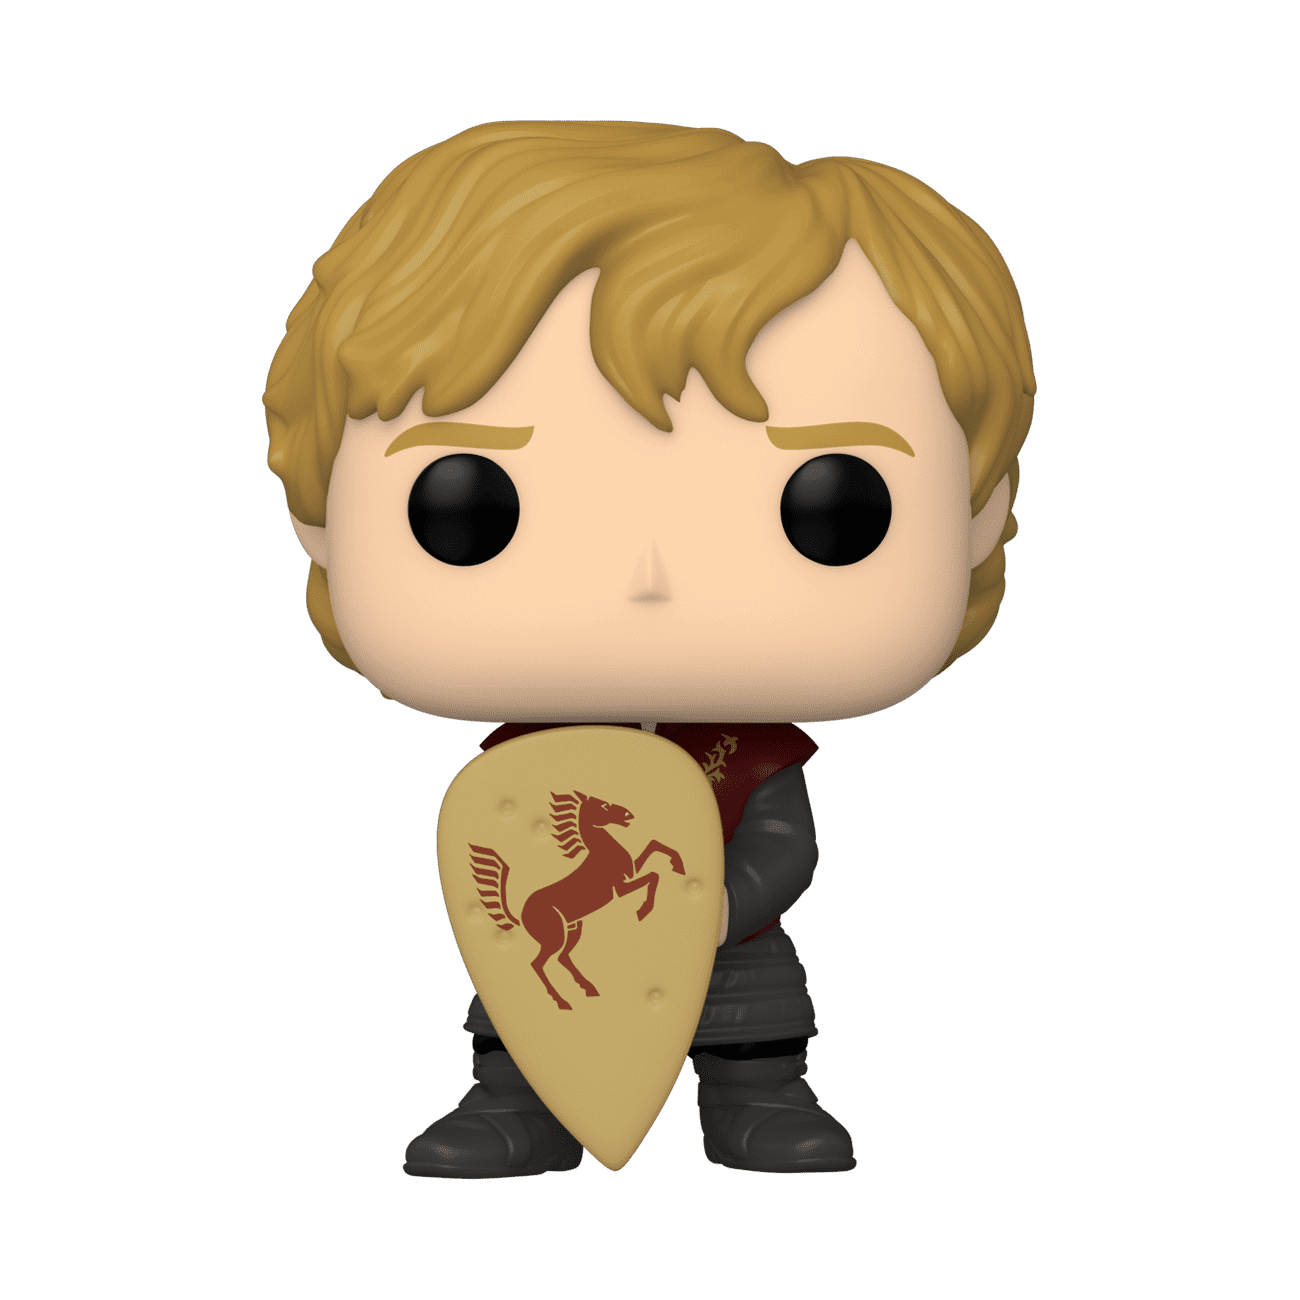 Funko Game Of Thrones POP Tyrion Lannister With Shield Vinyl Figure NEW IN STOCK 